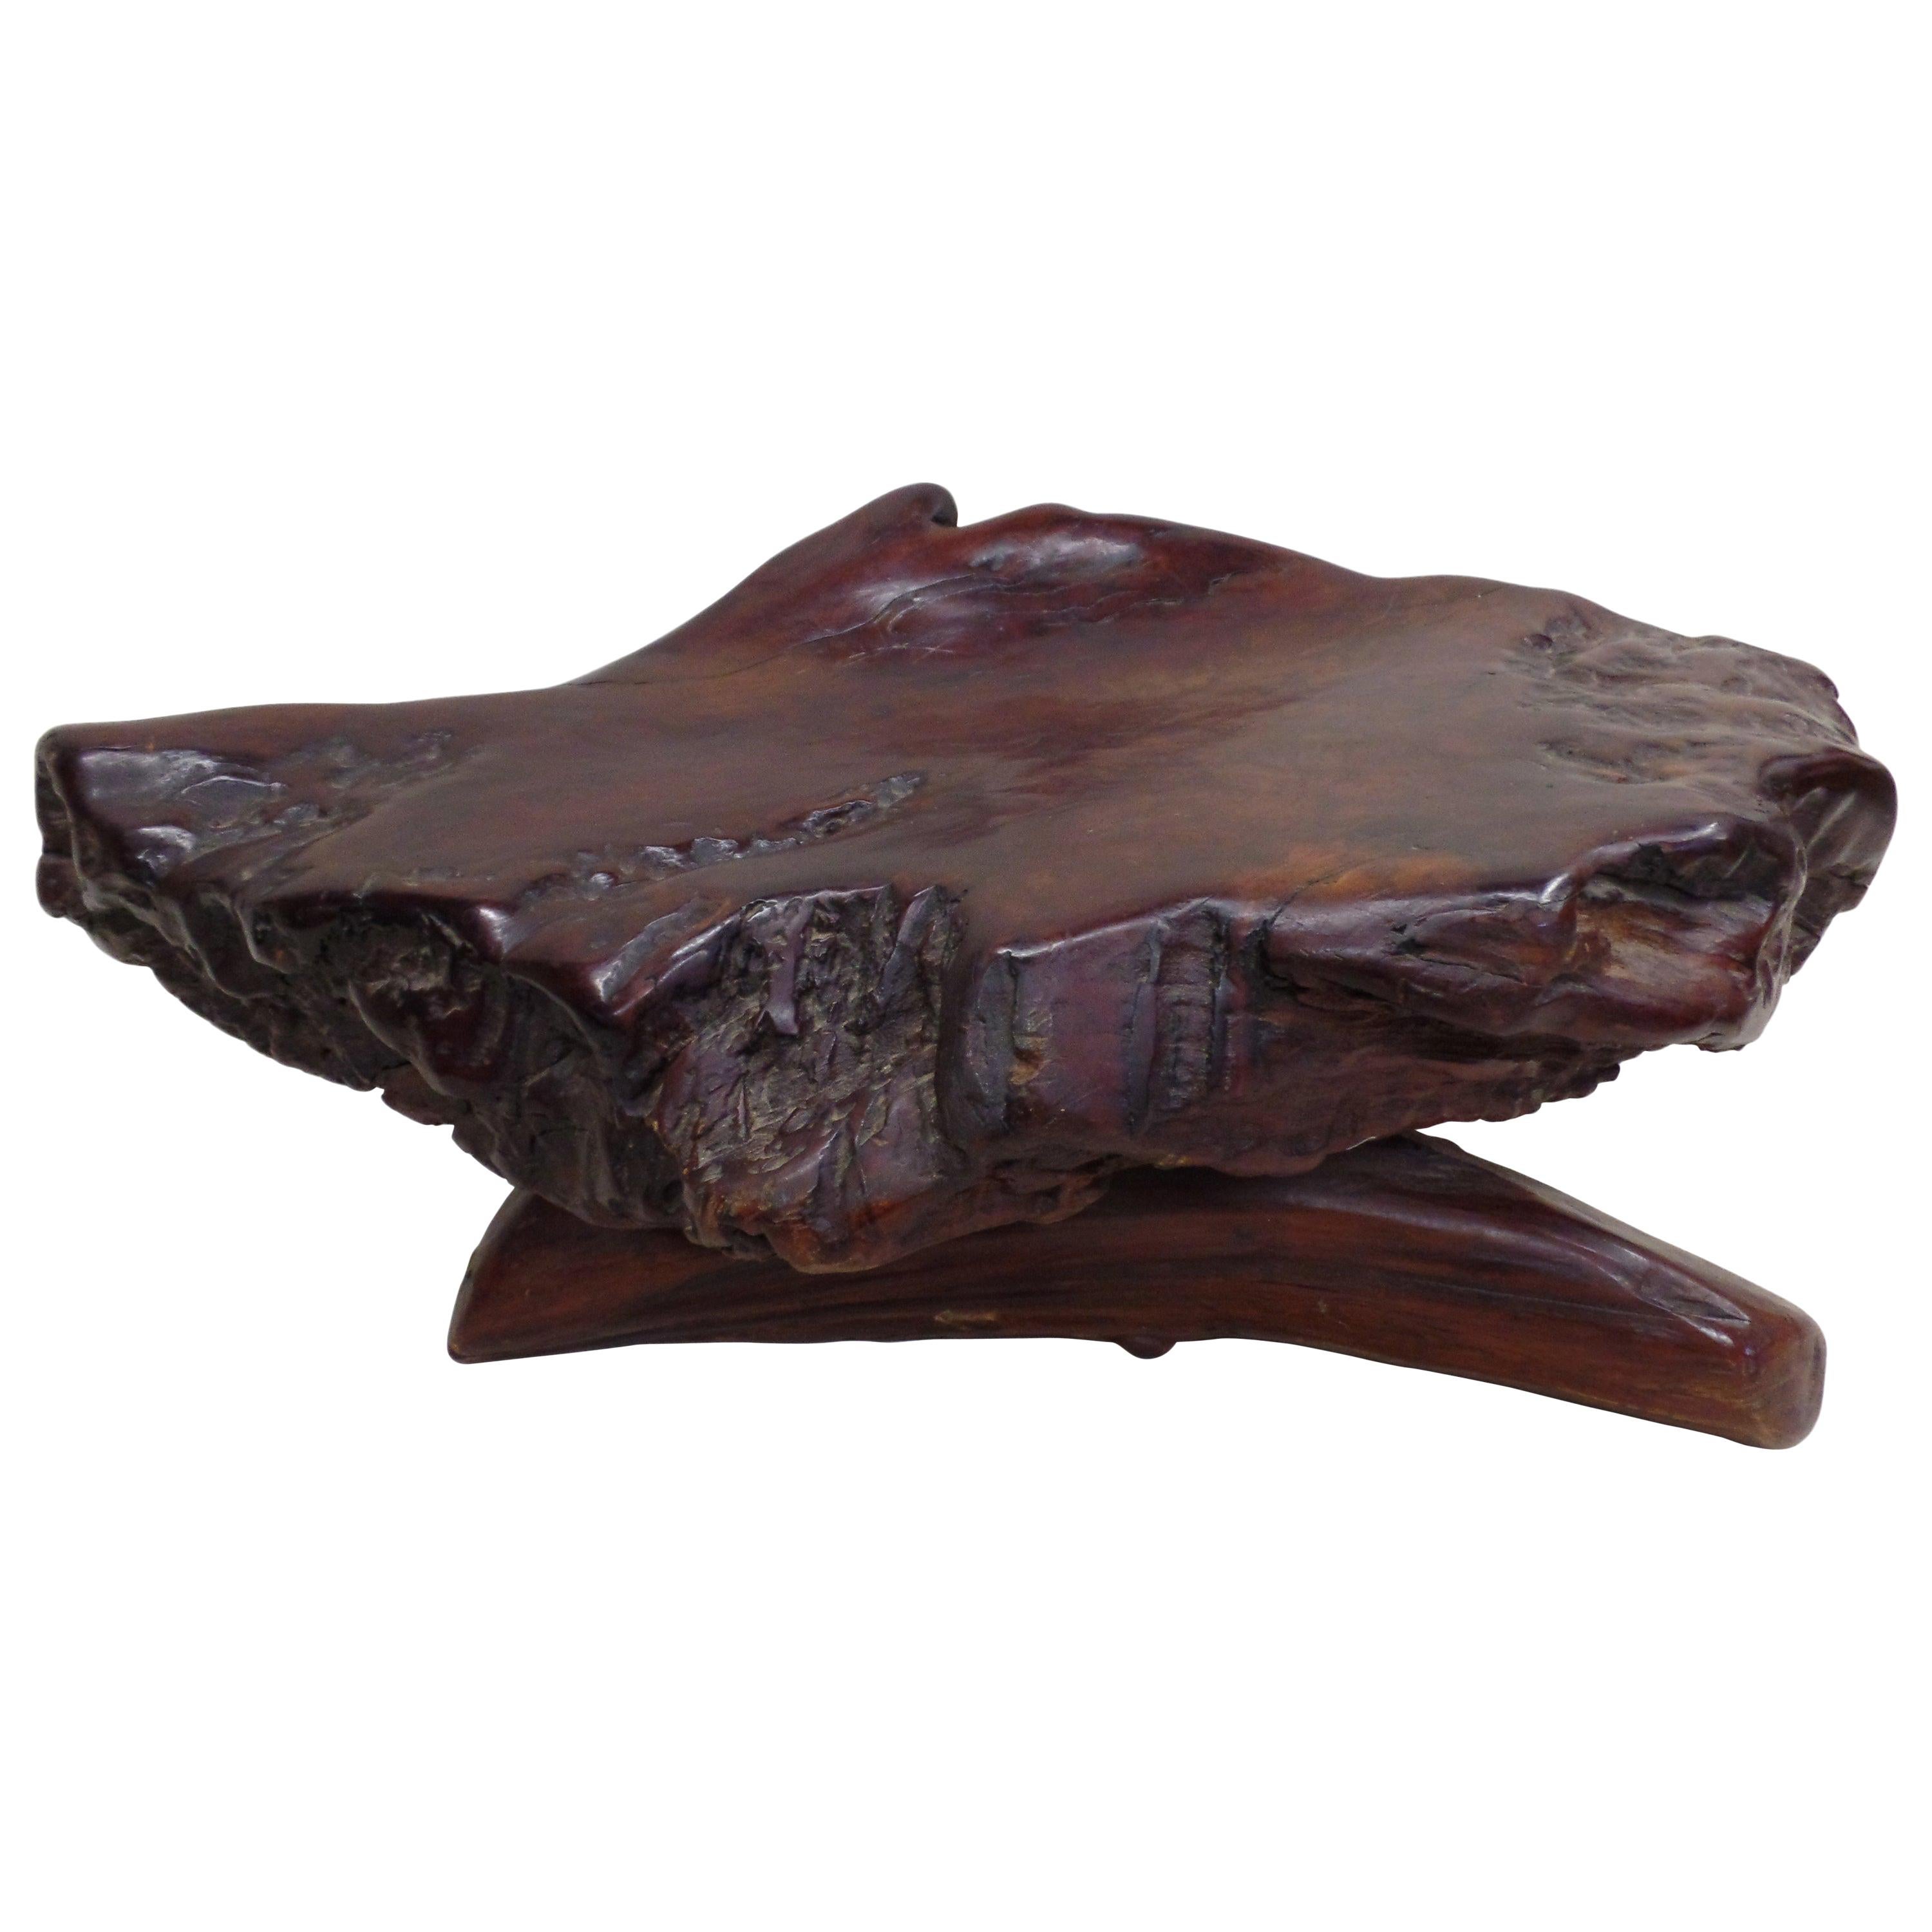 French Modern Craftsman Hand Carved Wood Alpine Bench in an Organic Form, 1930